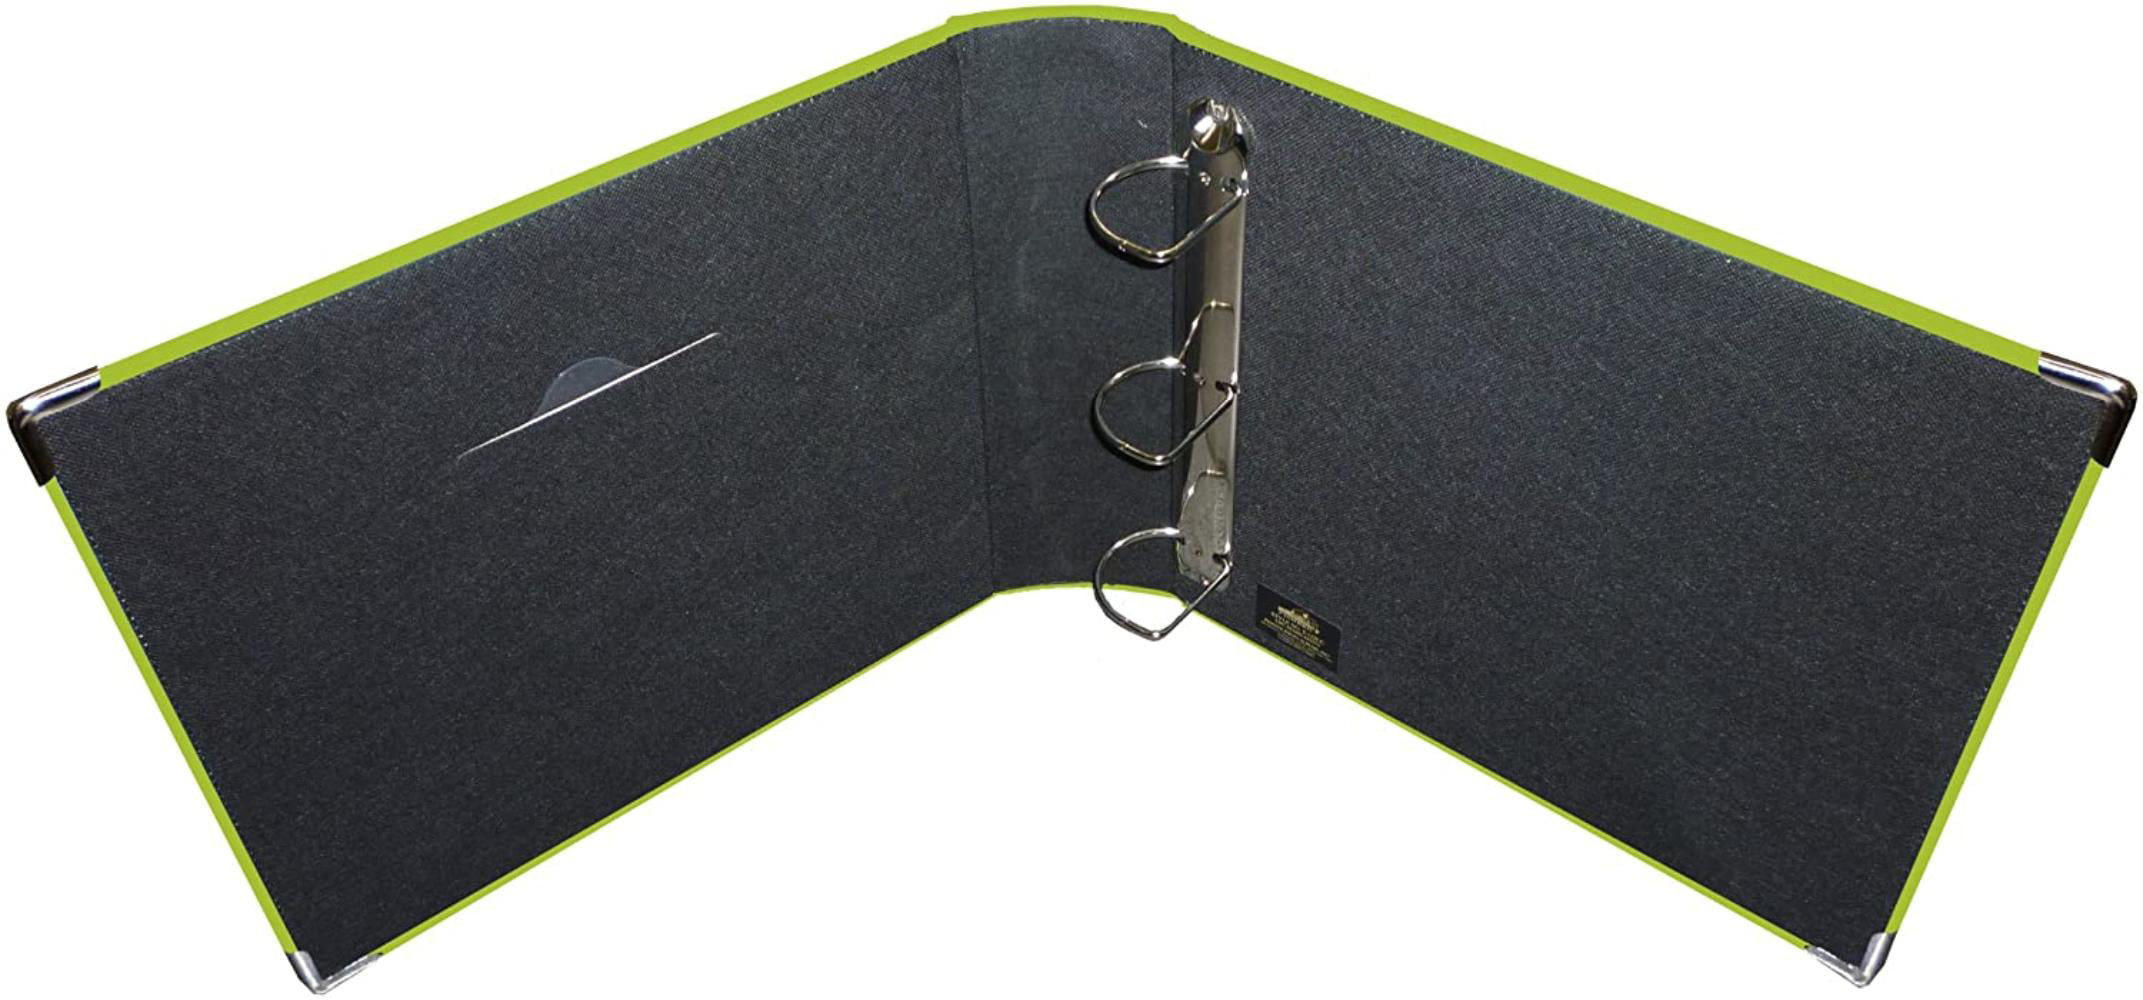 T-12JF/C Jumbo 3-Ring Sewn Leatherette Frame Cover Memory Book Binder Lime Green New Version 